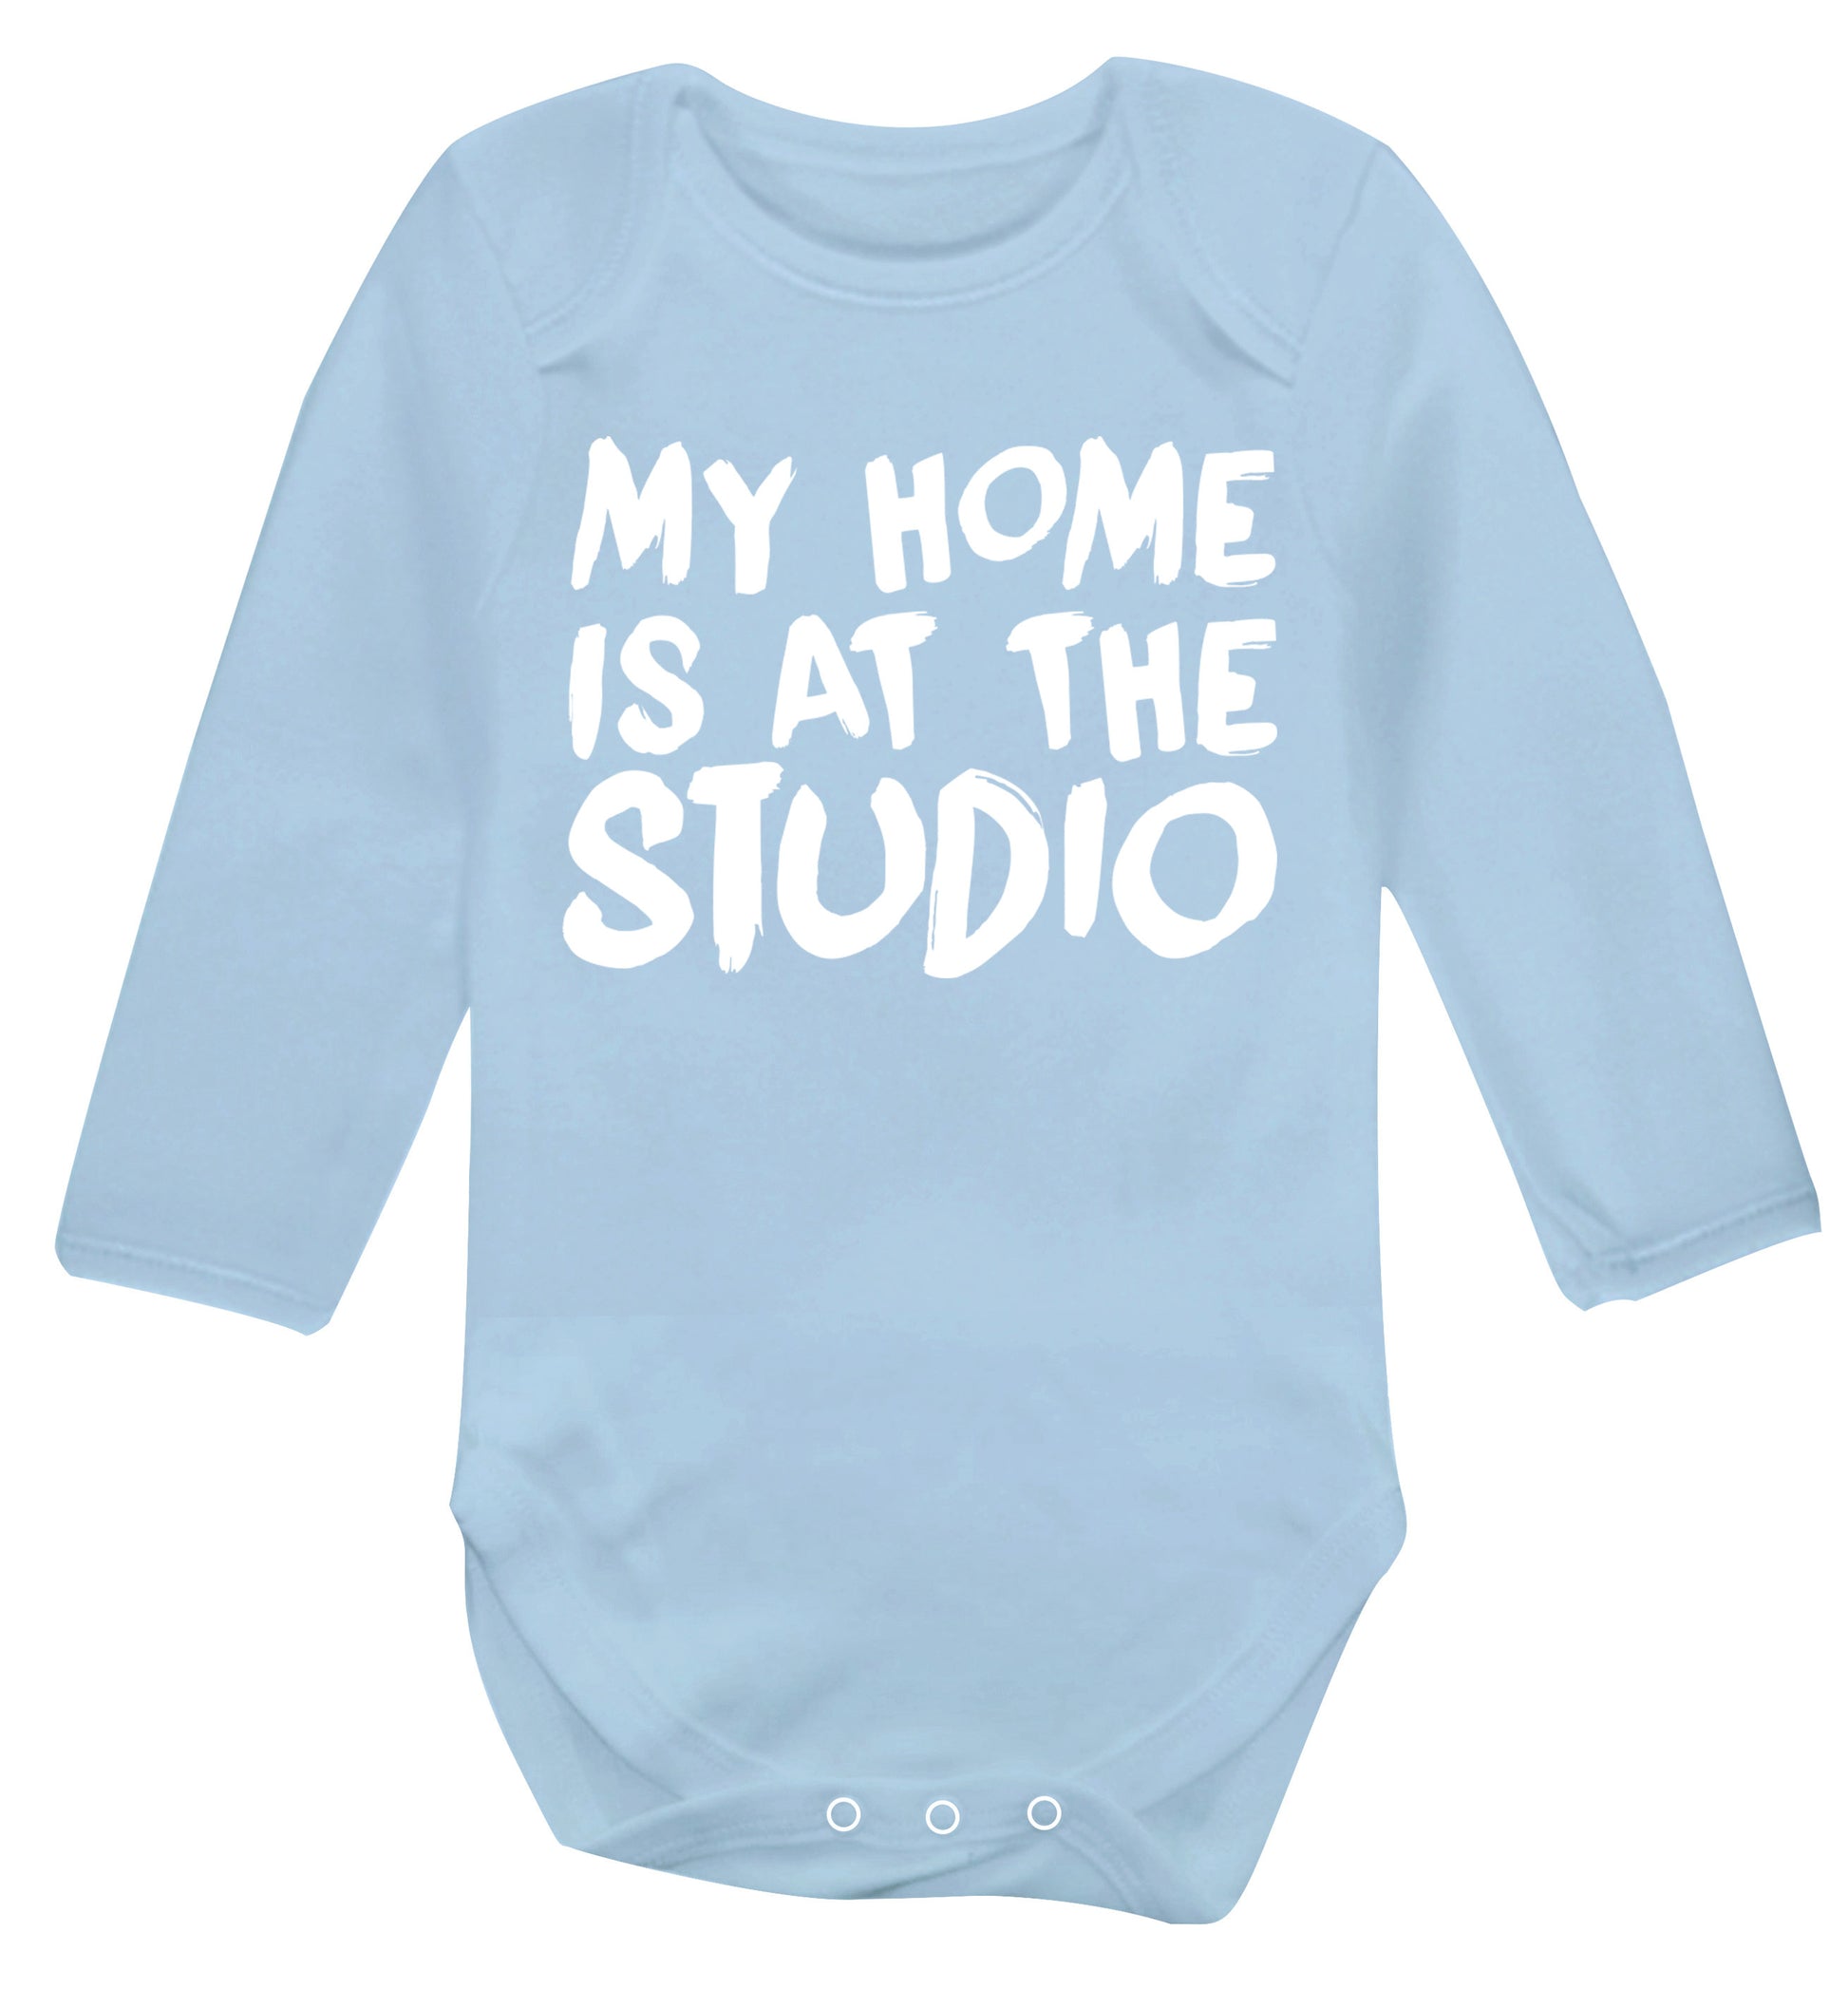 My home is at the studio Baby Vest long sleeved pale blue 6-12 months